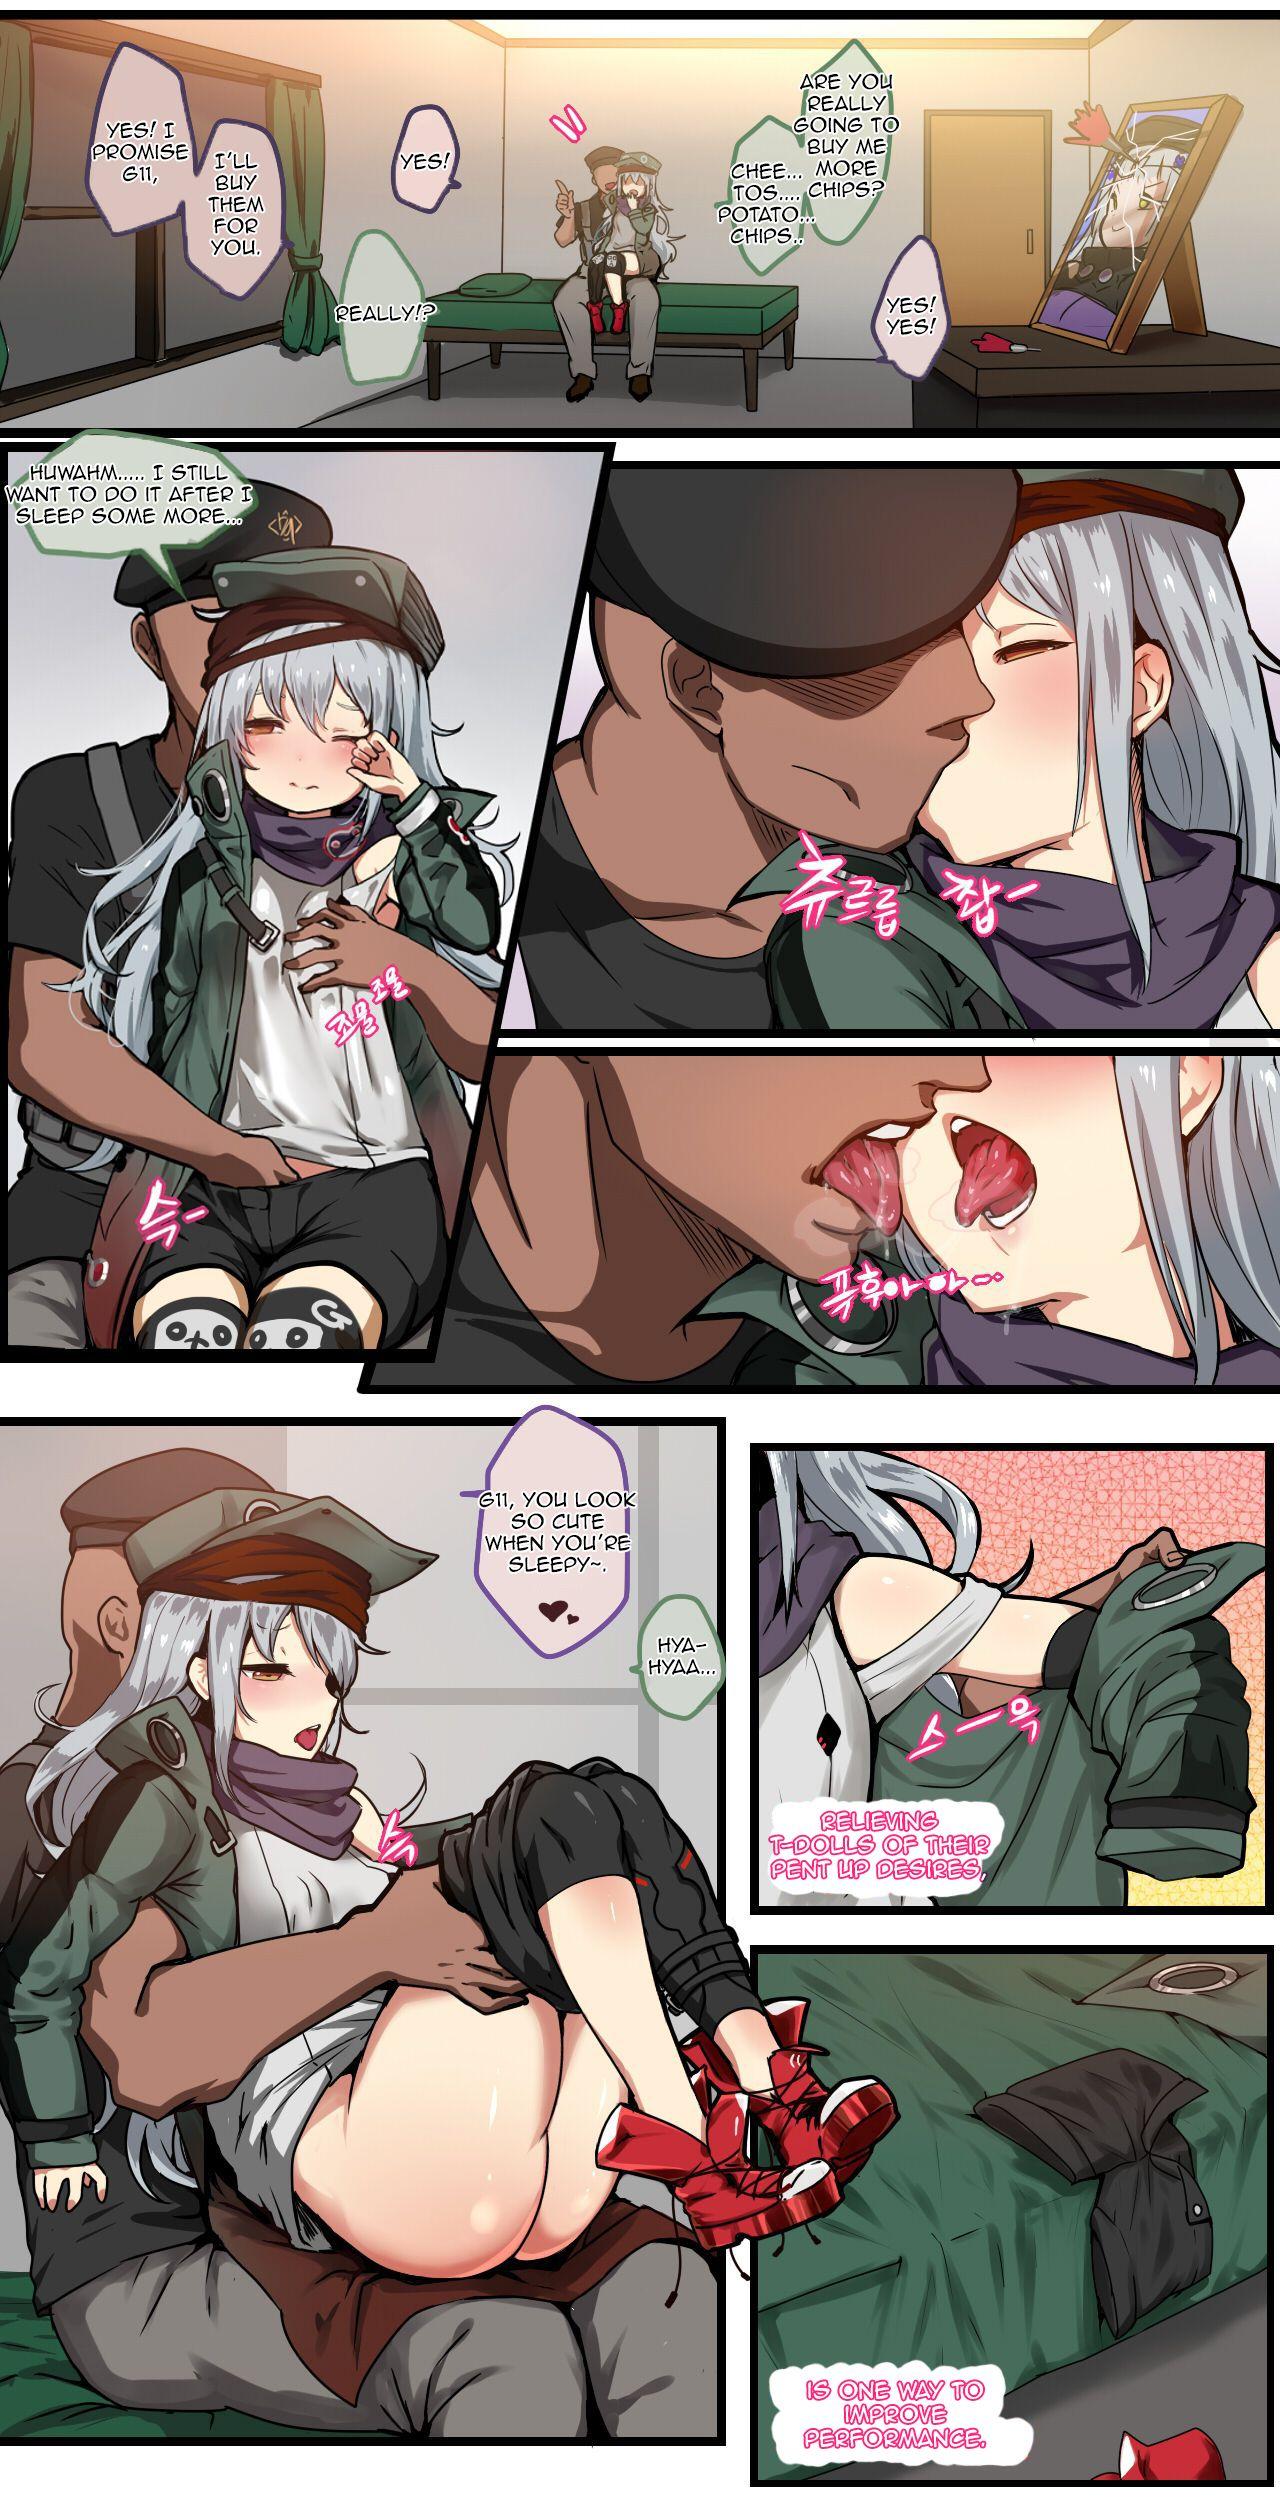 Hotporn How to use dolls 01 - Girls frontline Shot - Page 2